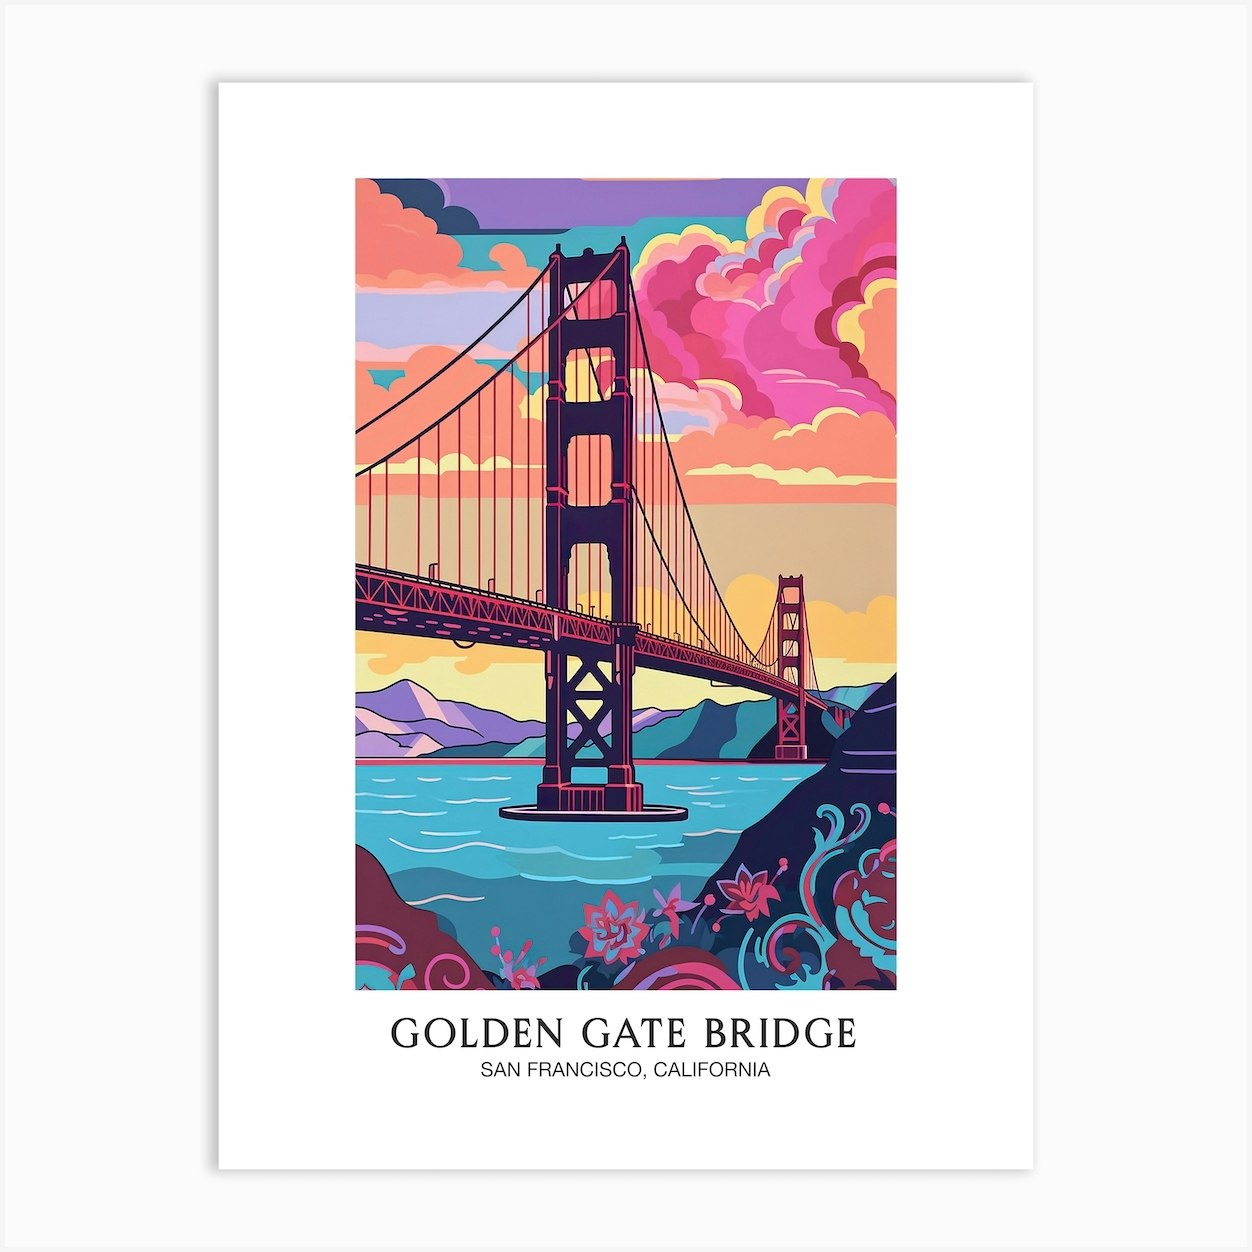 Poster Art Travel Print Collection San Golden 8 Francisco - Fy Bridge Poster by Colourful Gate Travel